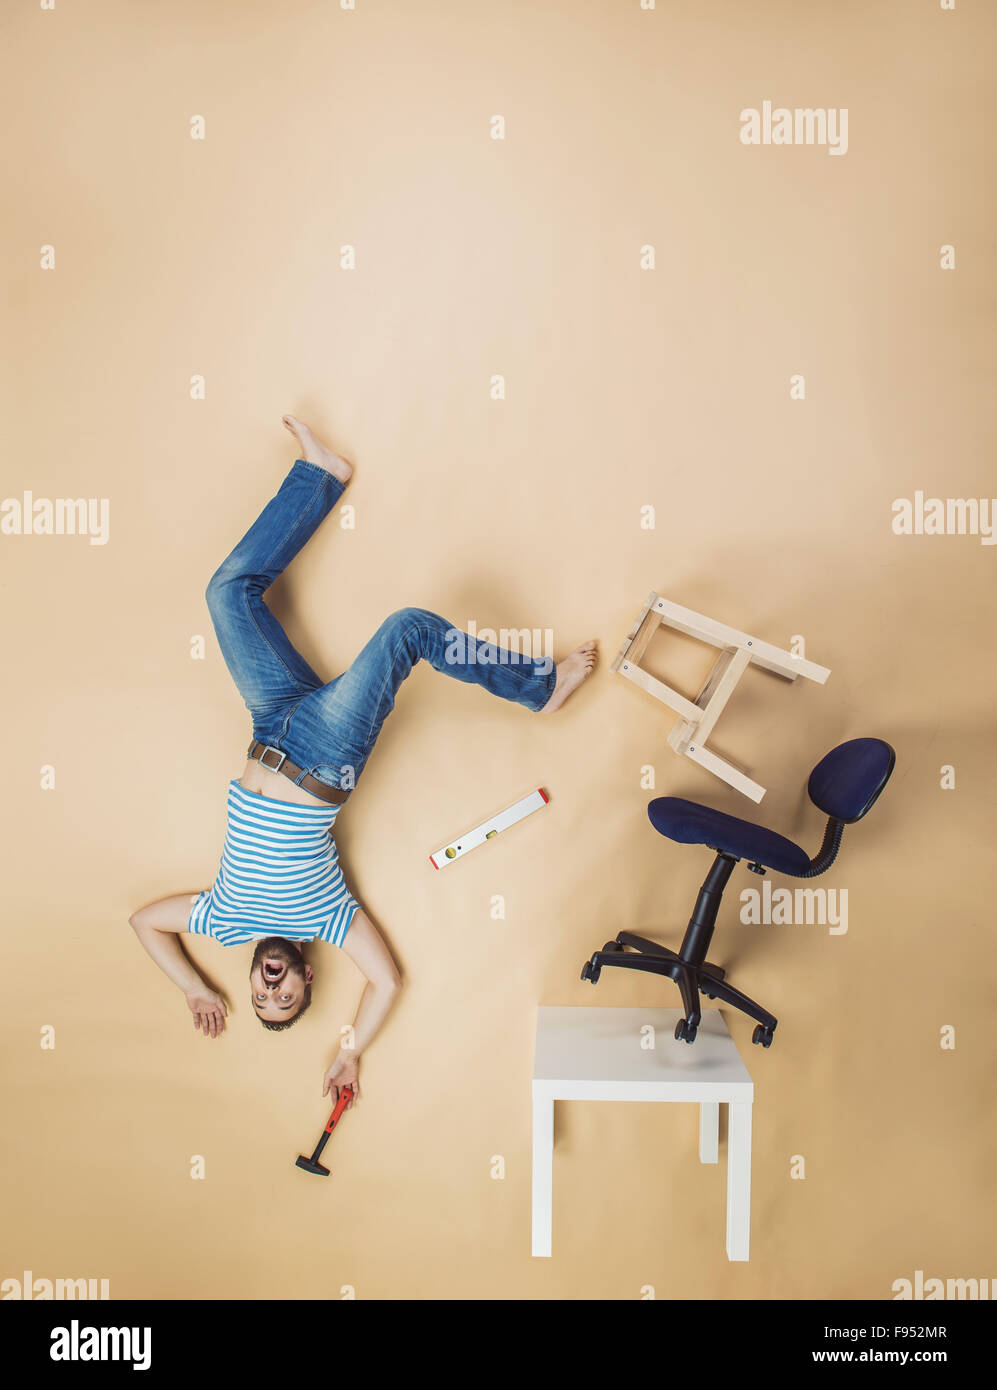 Handyman falling dangerously from a high pile of chairs. Studio shot on a beige background. Stock Photo